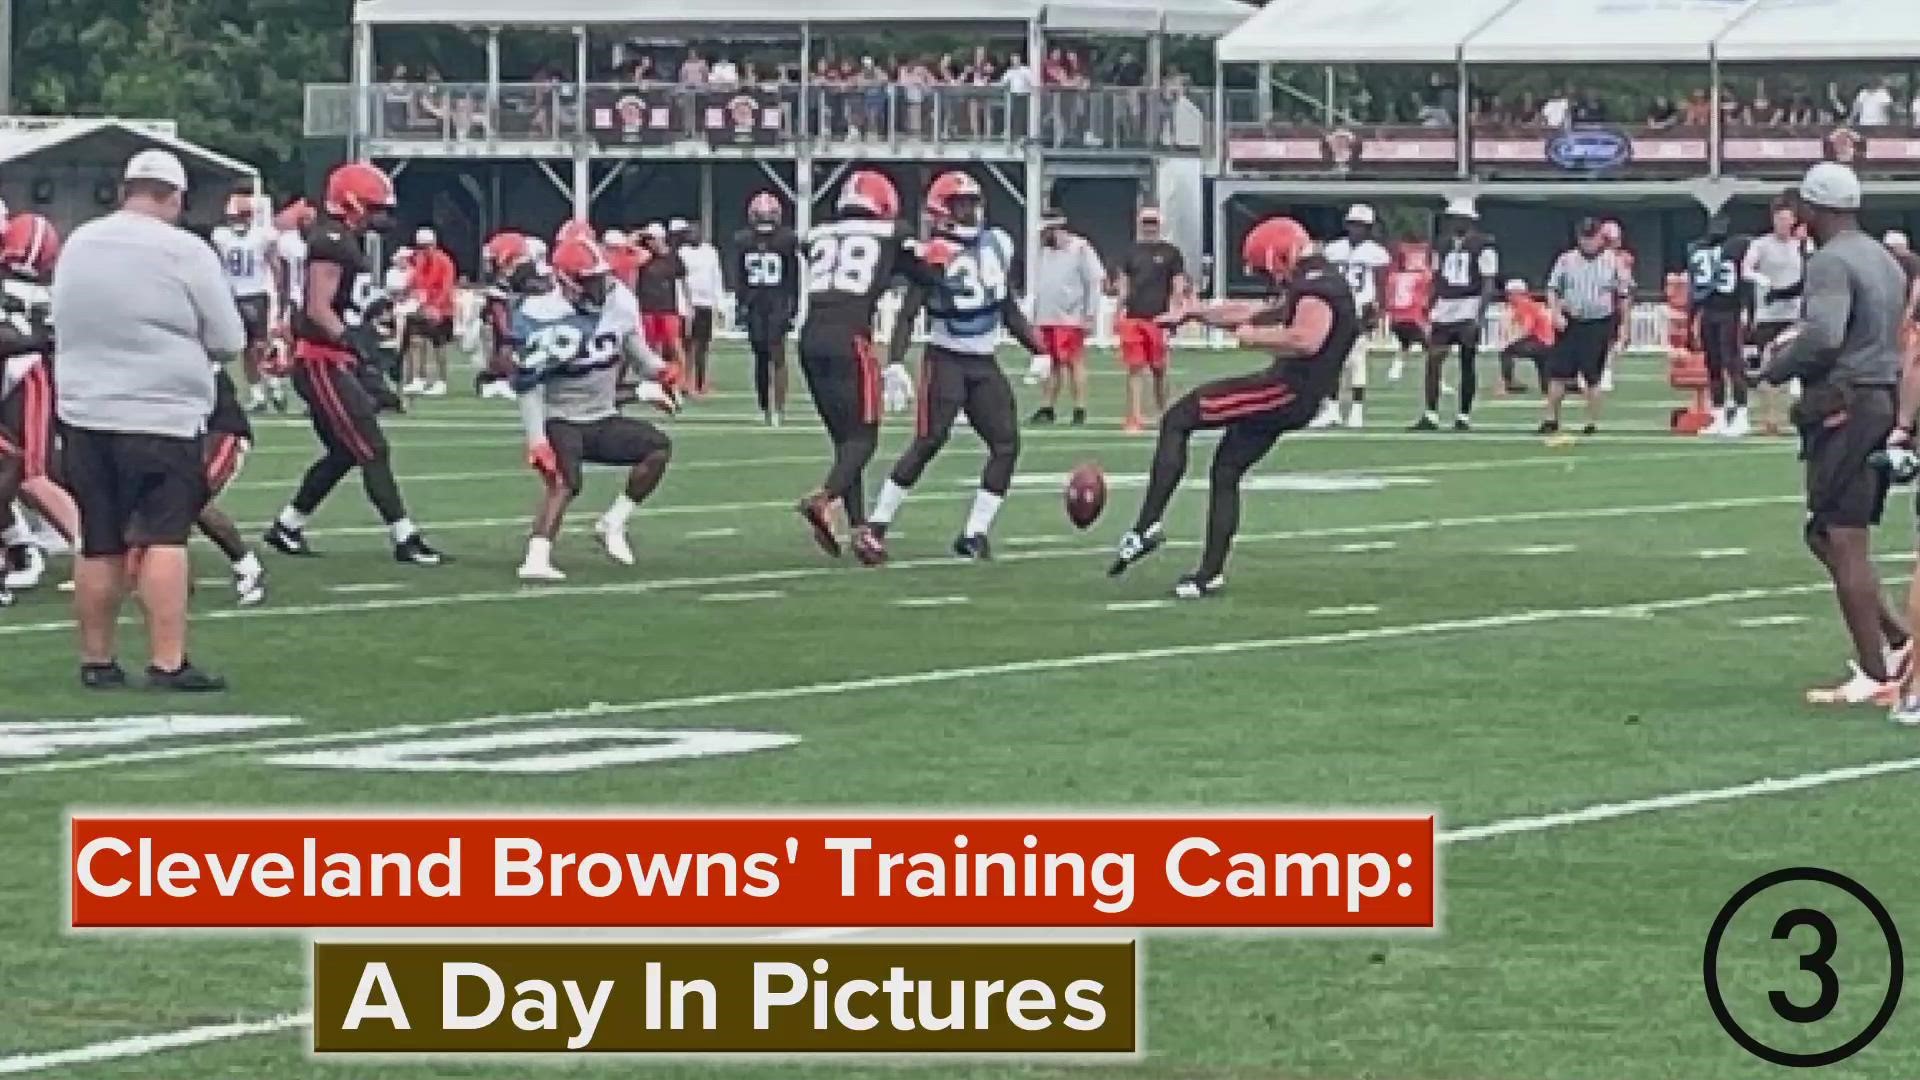 Check out the pictures from Tuesday's Cleveland Browns' Training Camp.